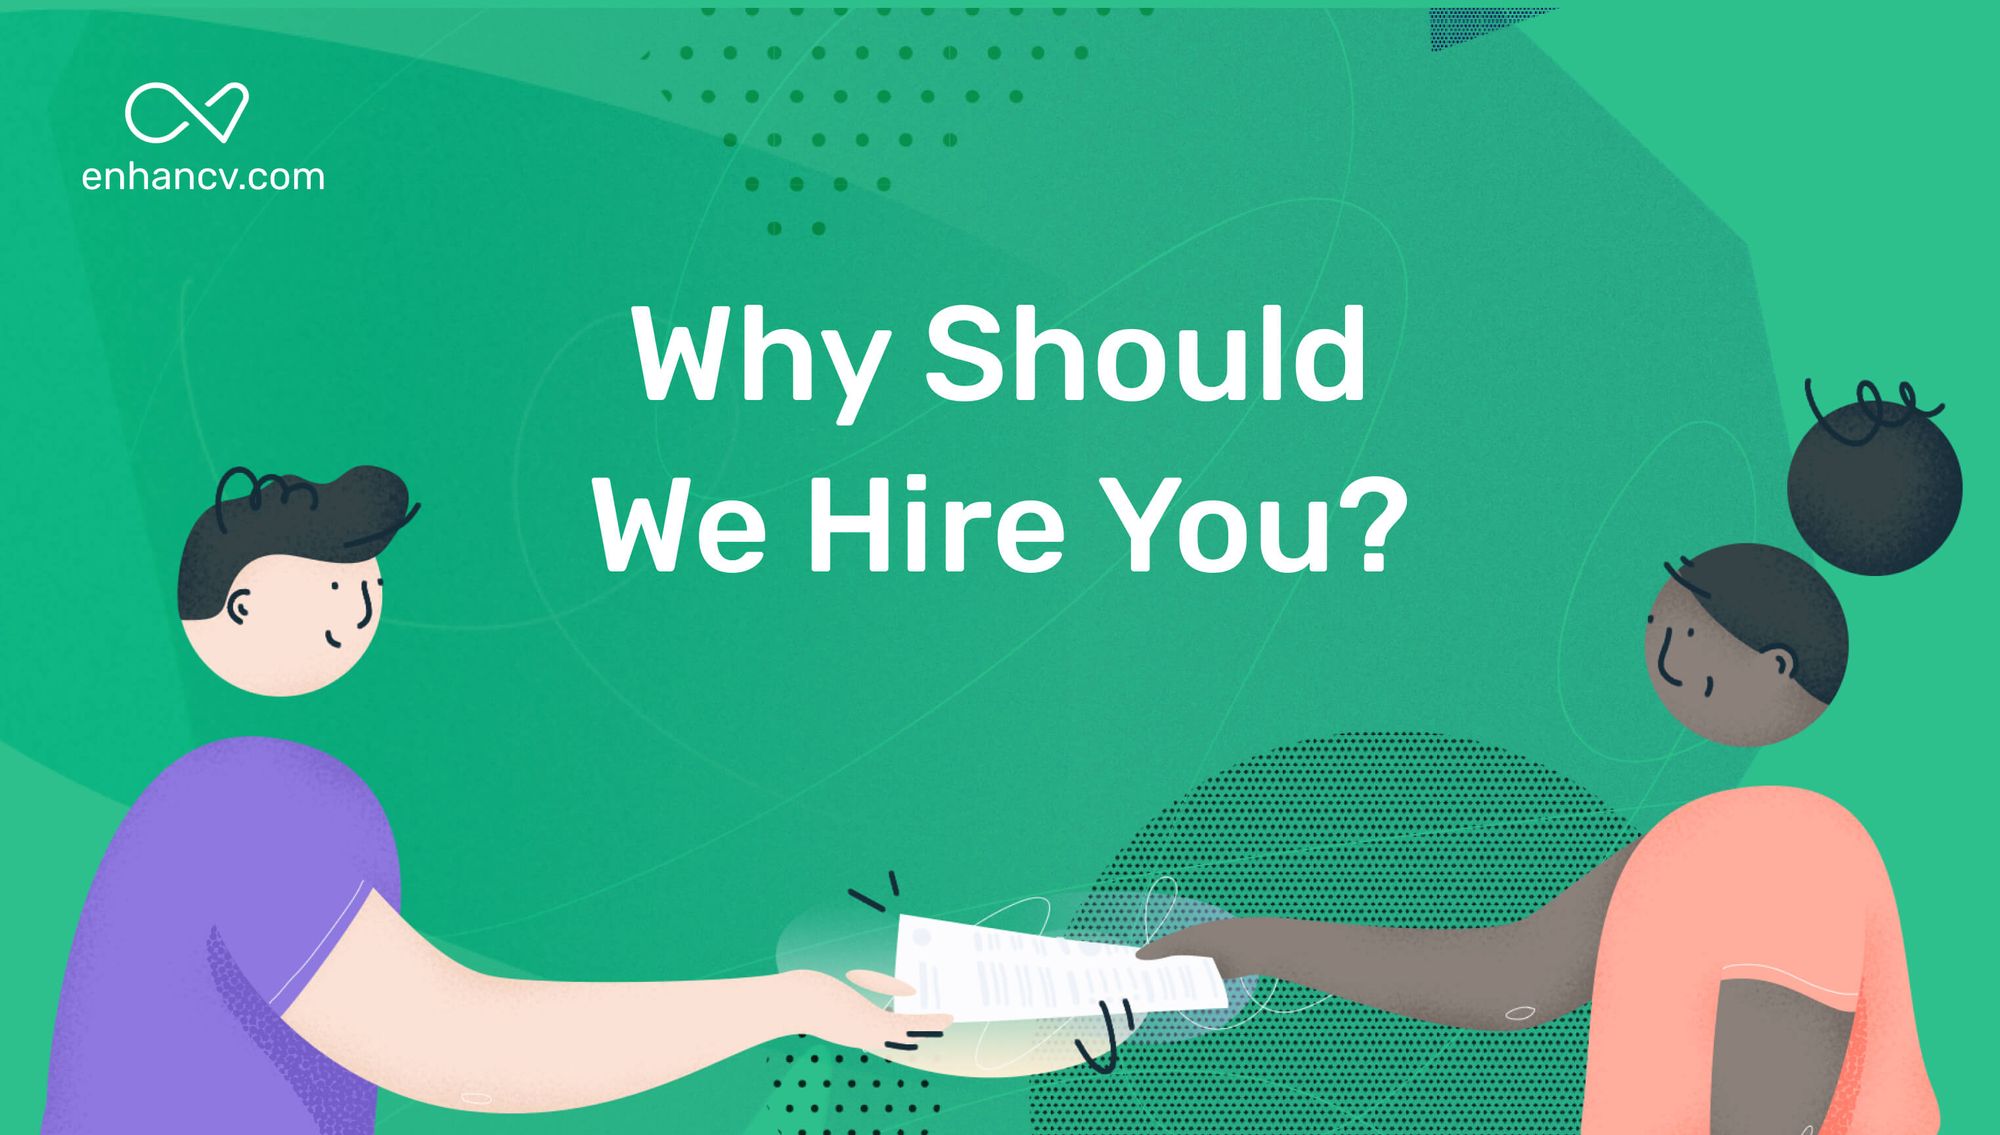 Why should we hire you